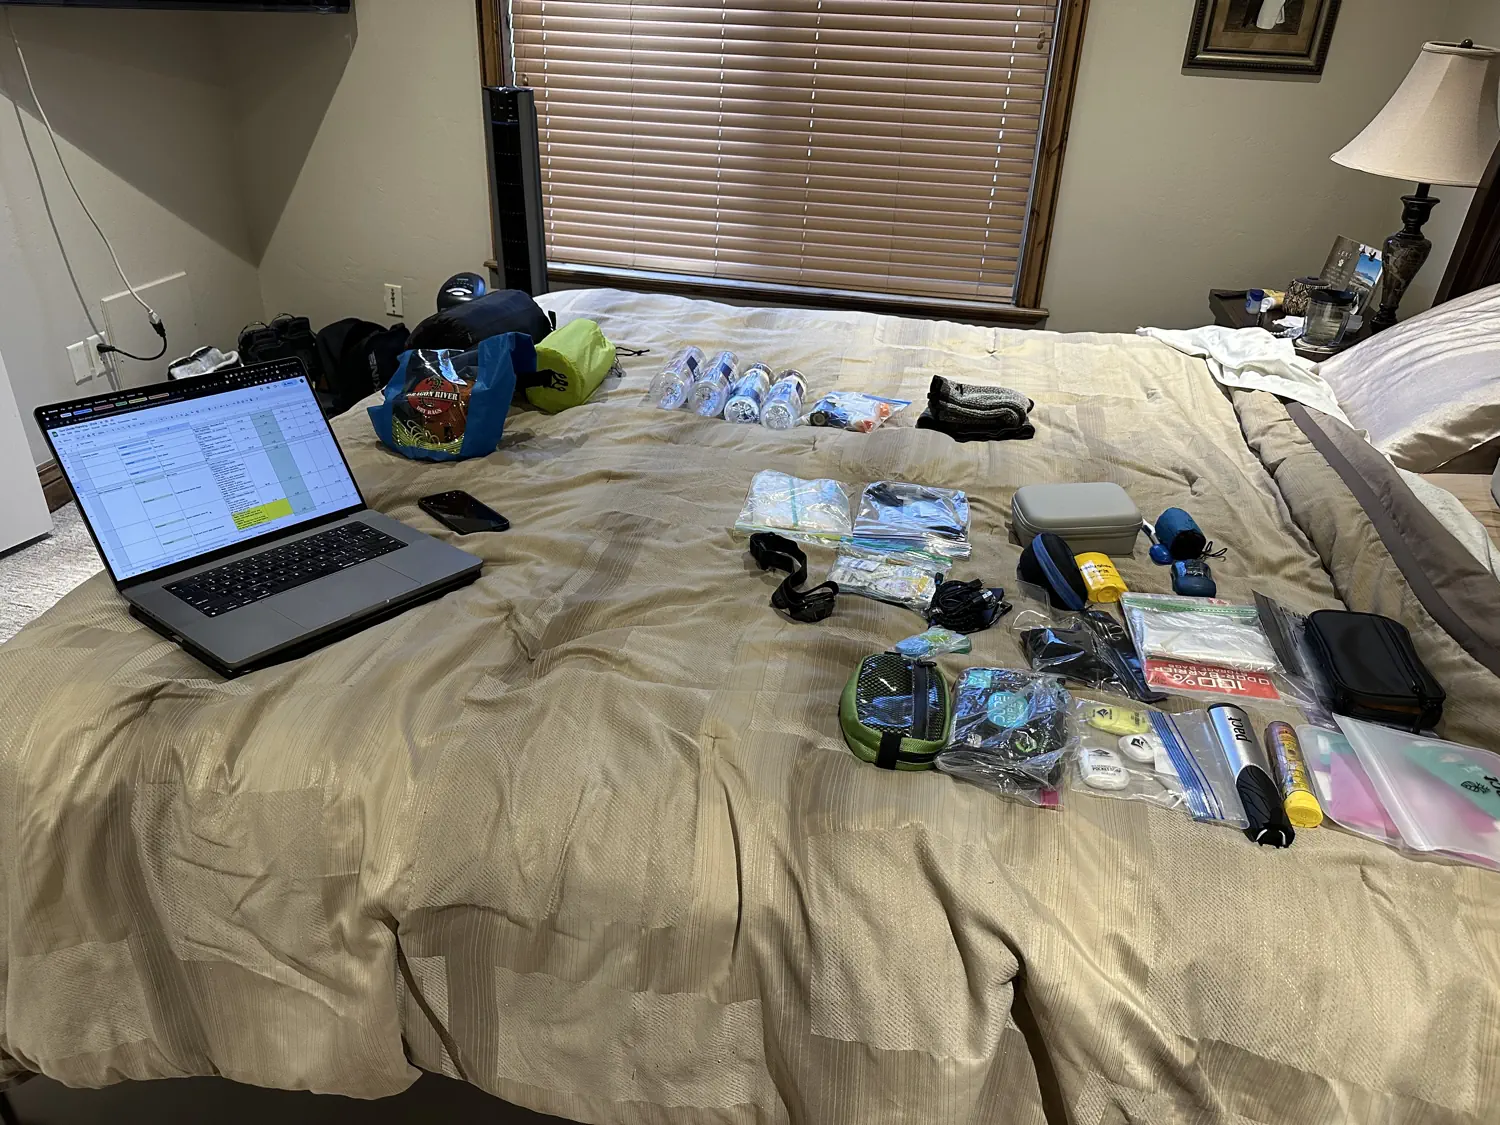 Keith is going over his Tour Divide packing spreadsheet and laying out the items